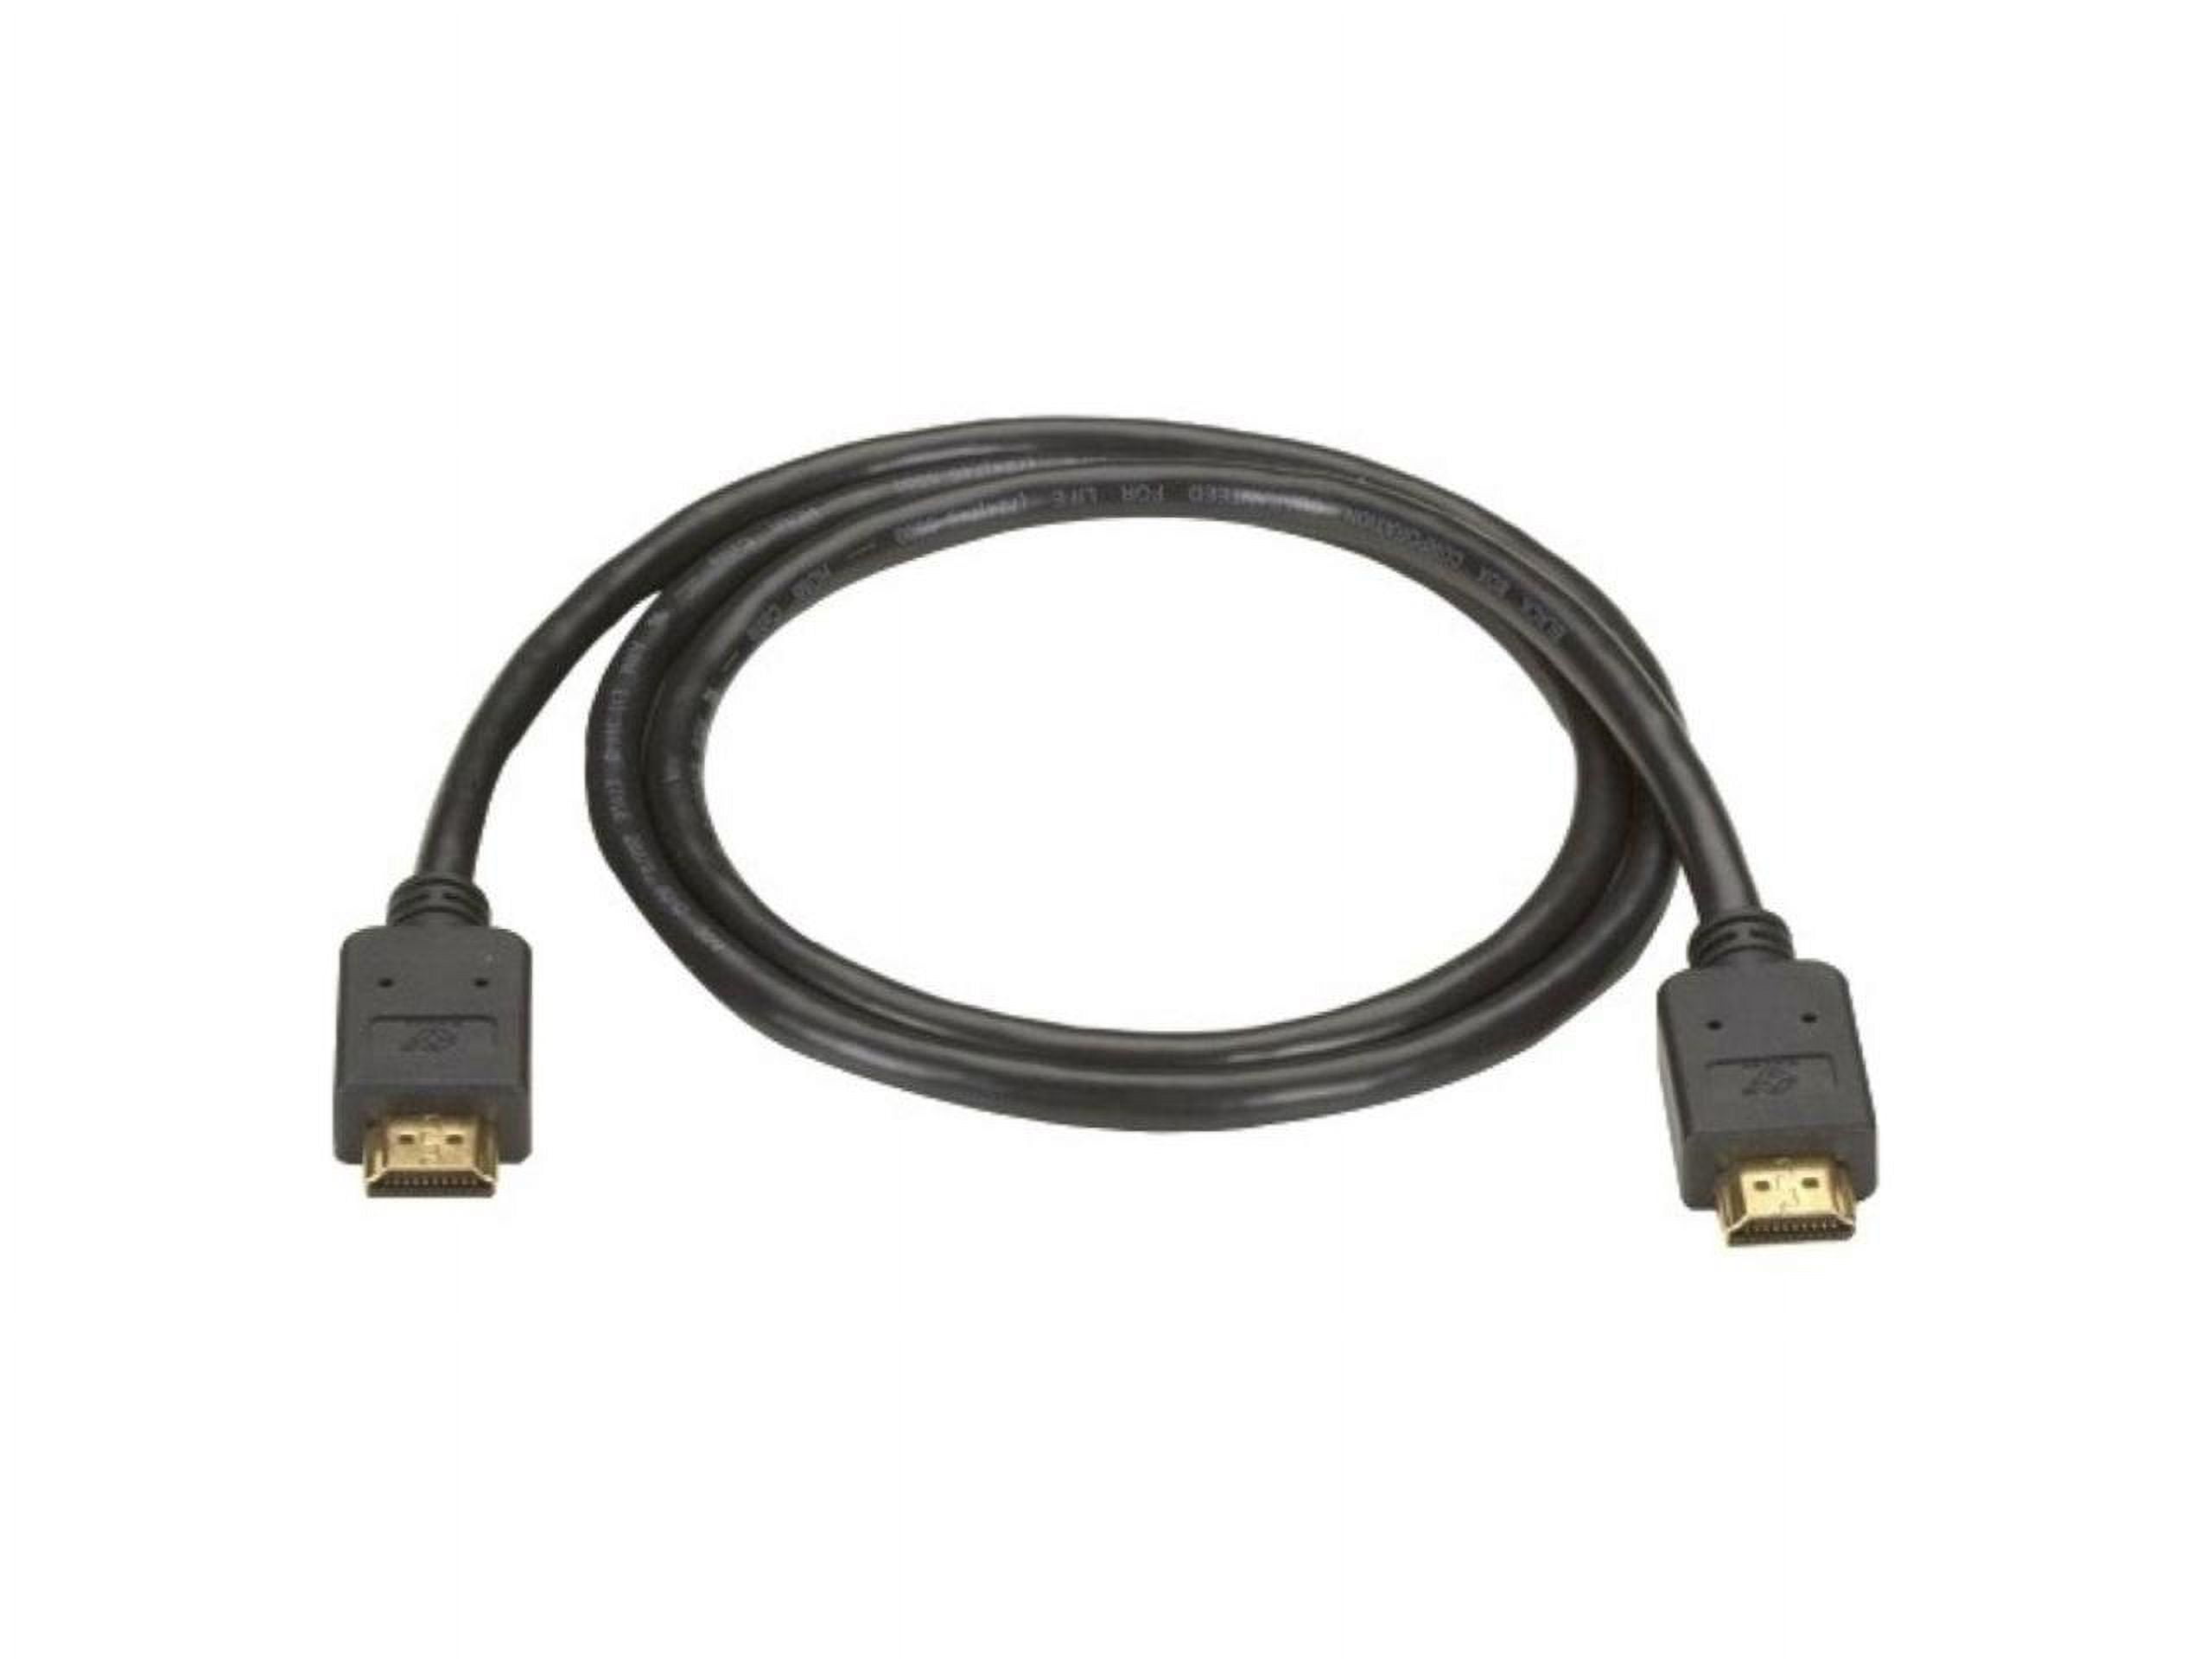 Buy Cable HDMI 1.4 Blow with ferrite filter - 3m Botland - Robotic